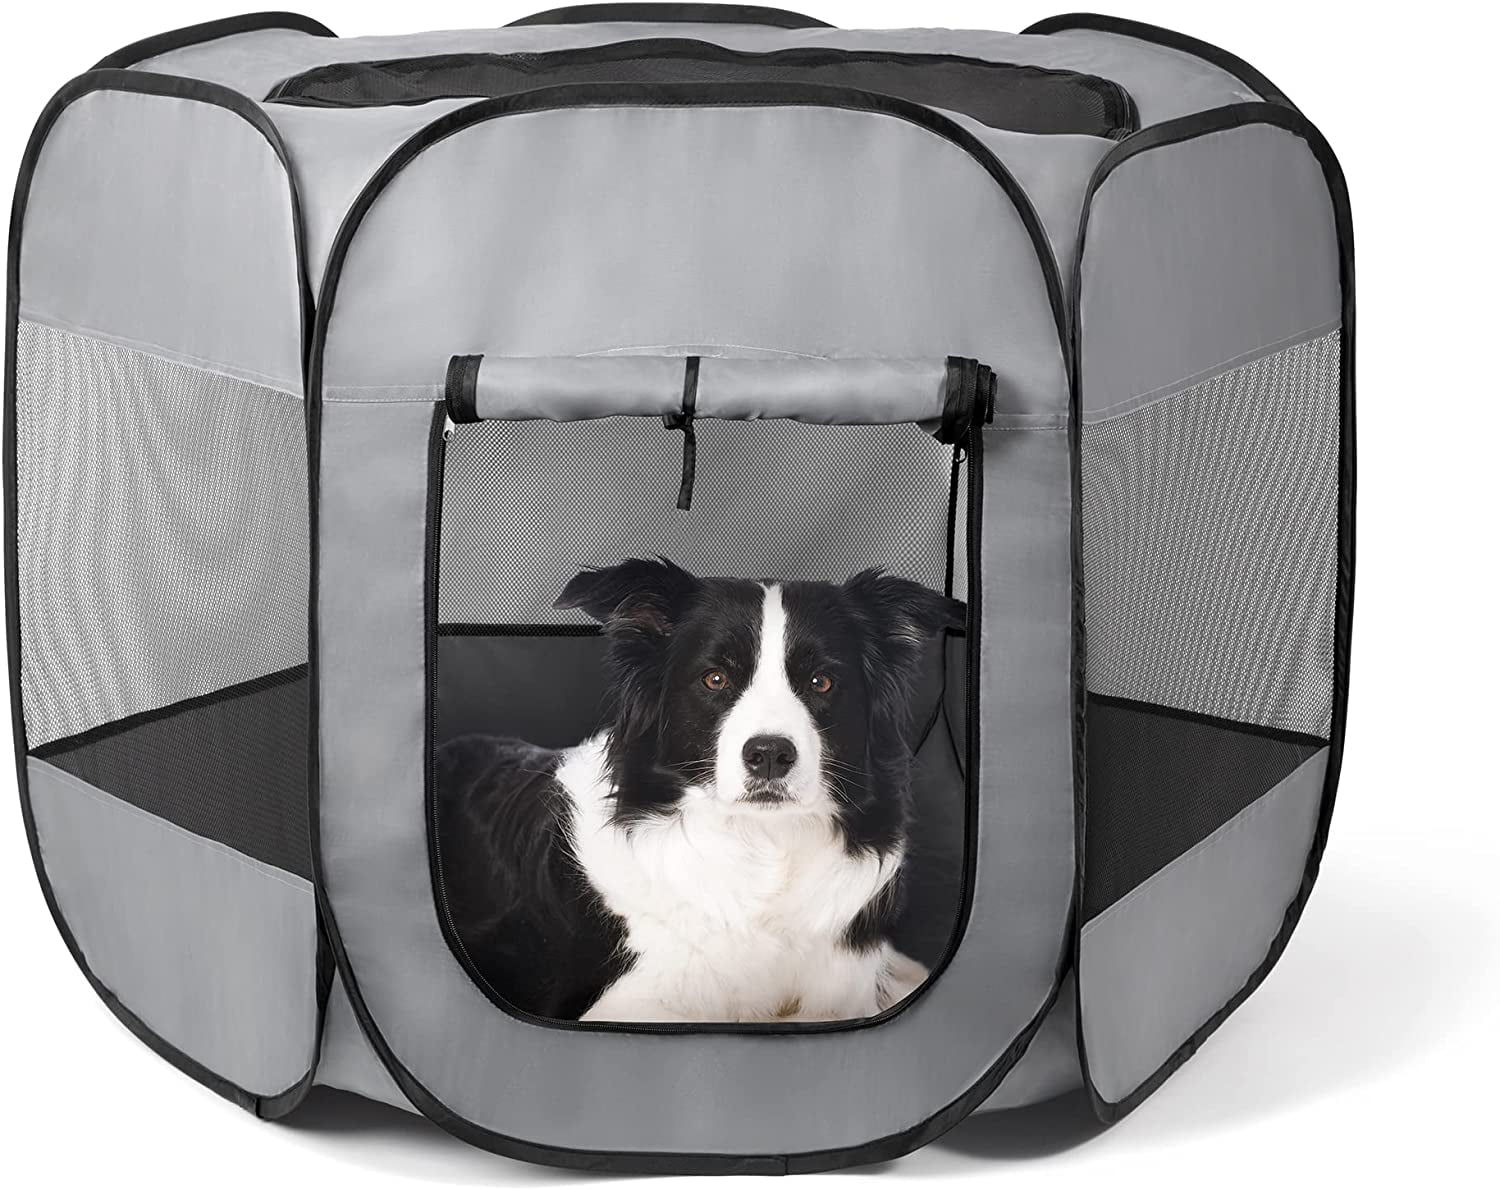 Pet Dog Cat Tent Playpen Exercise Play Pen Soft Crate Kennel Small Medium Large 